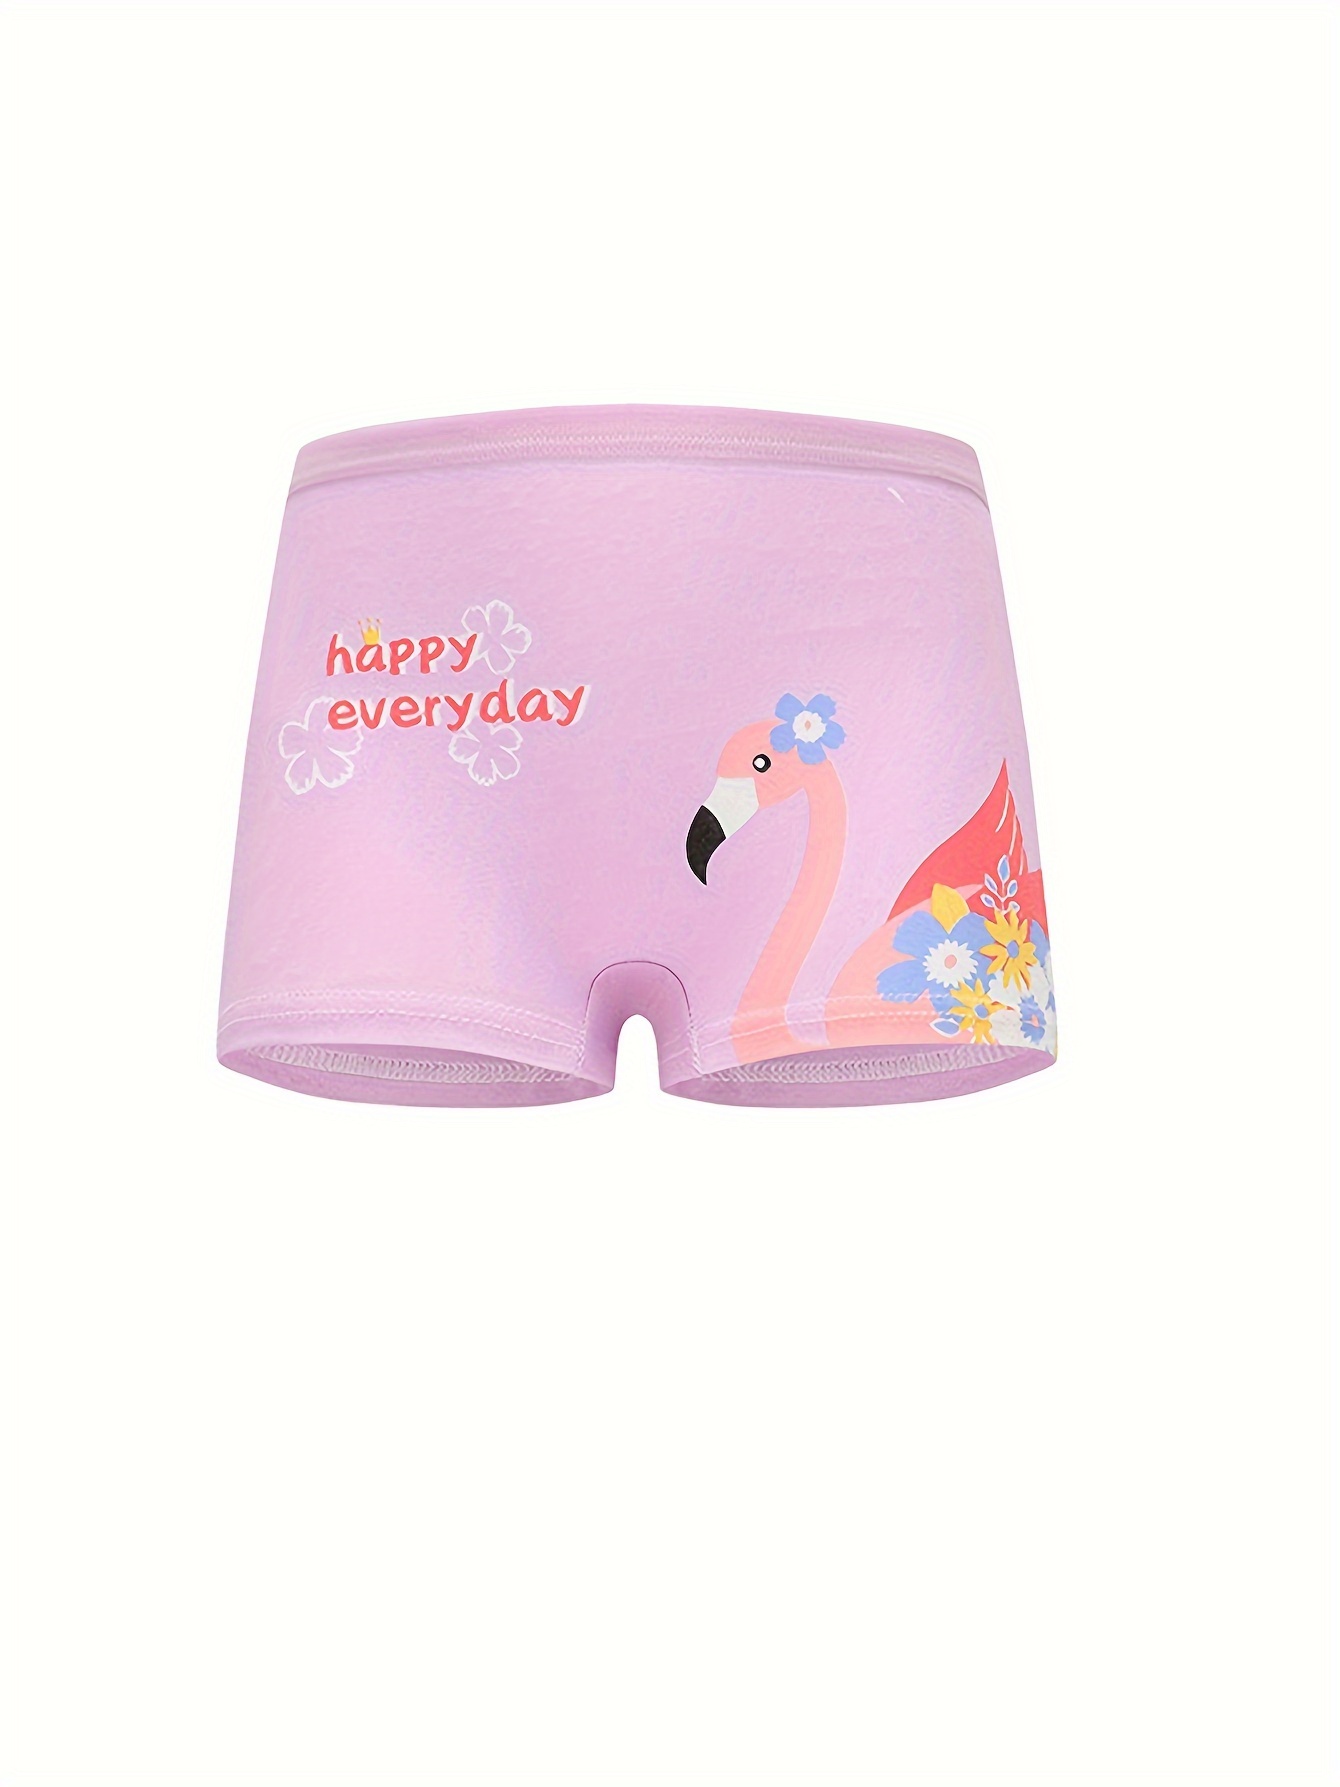 3-8 Year Old Girls Underwear Cotton Breathable New Baby Girl